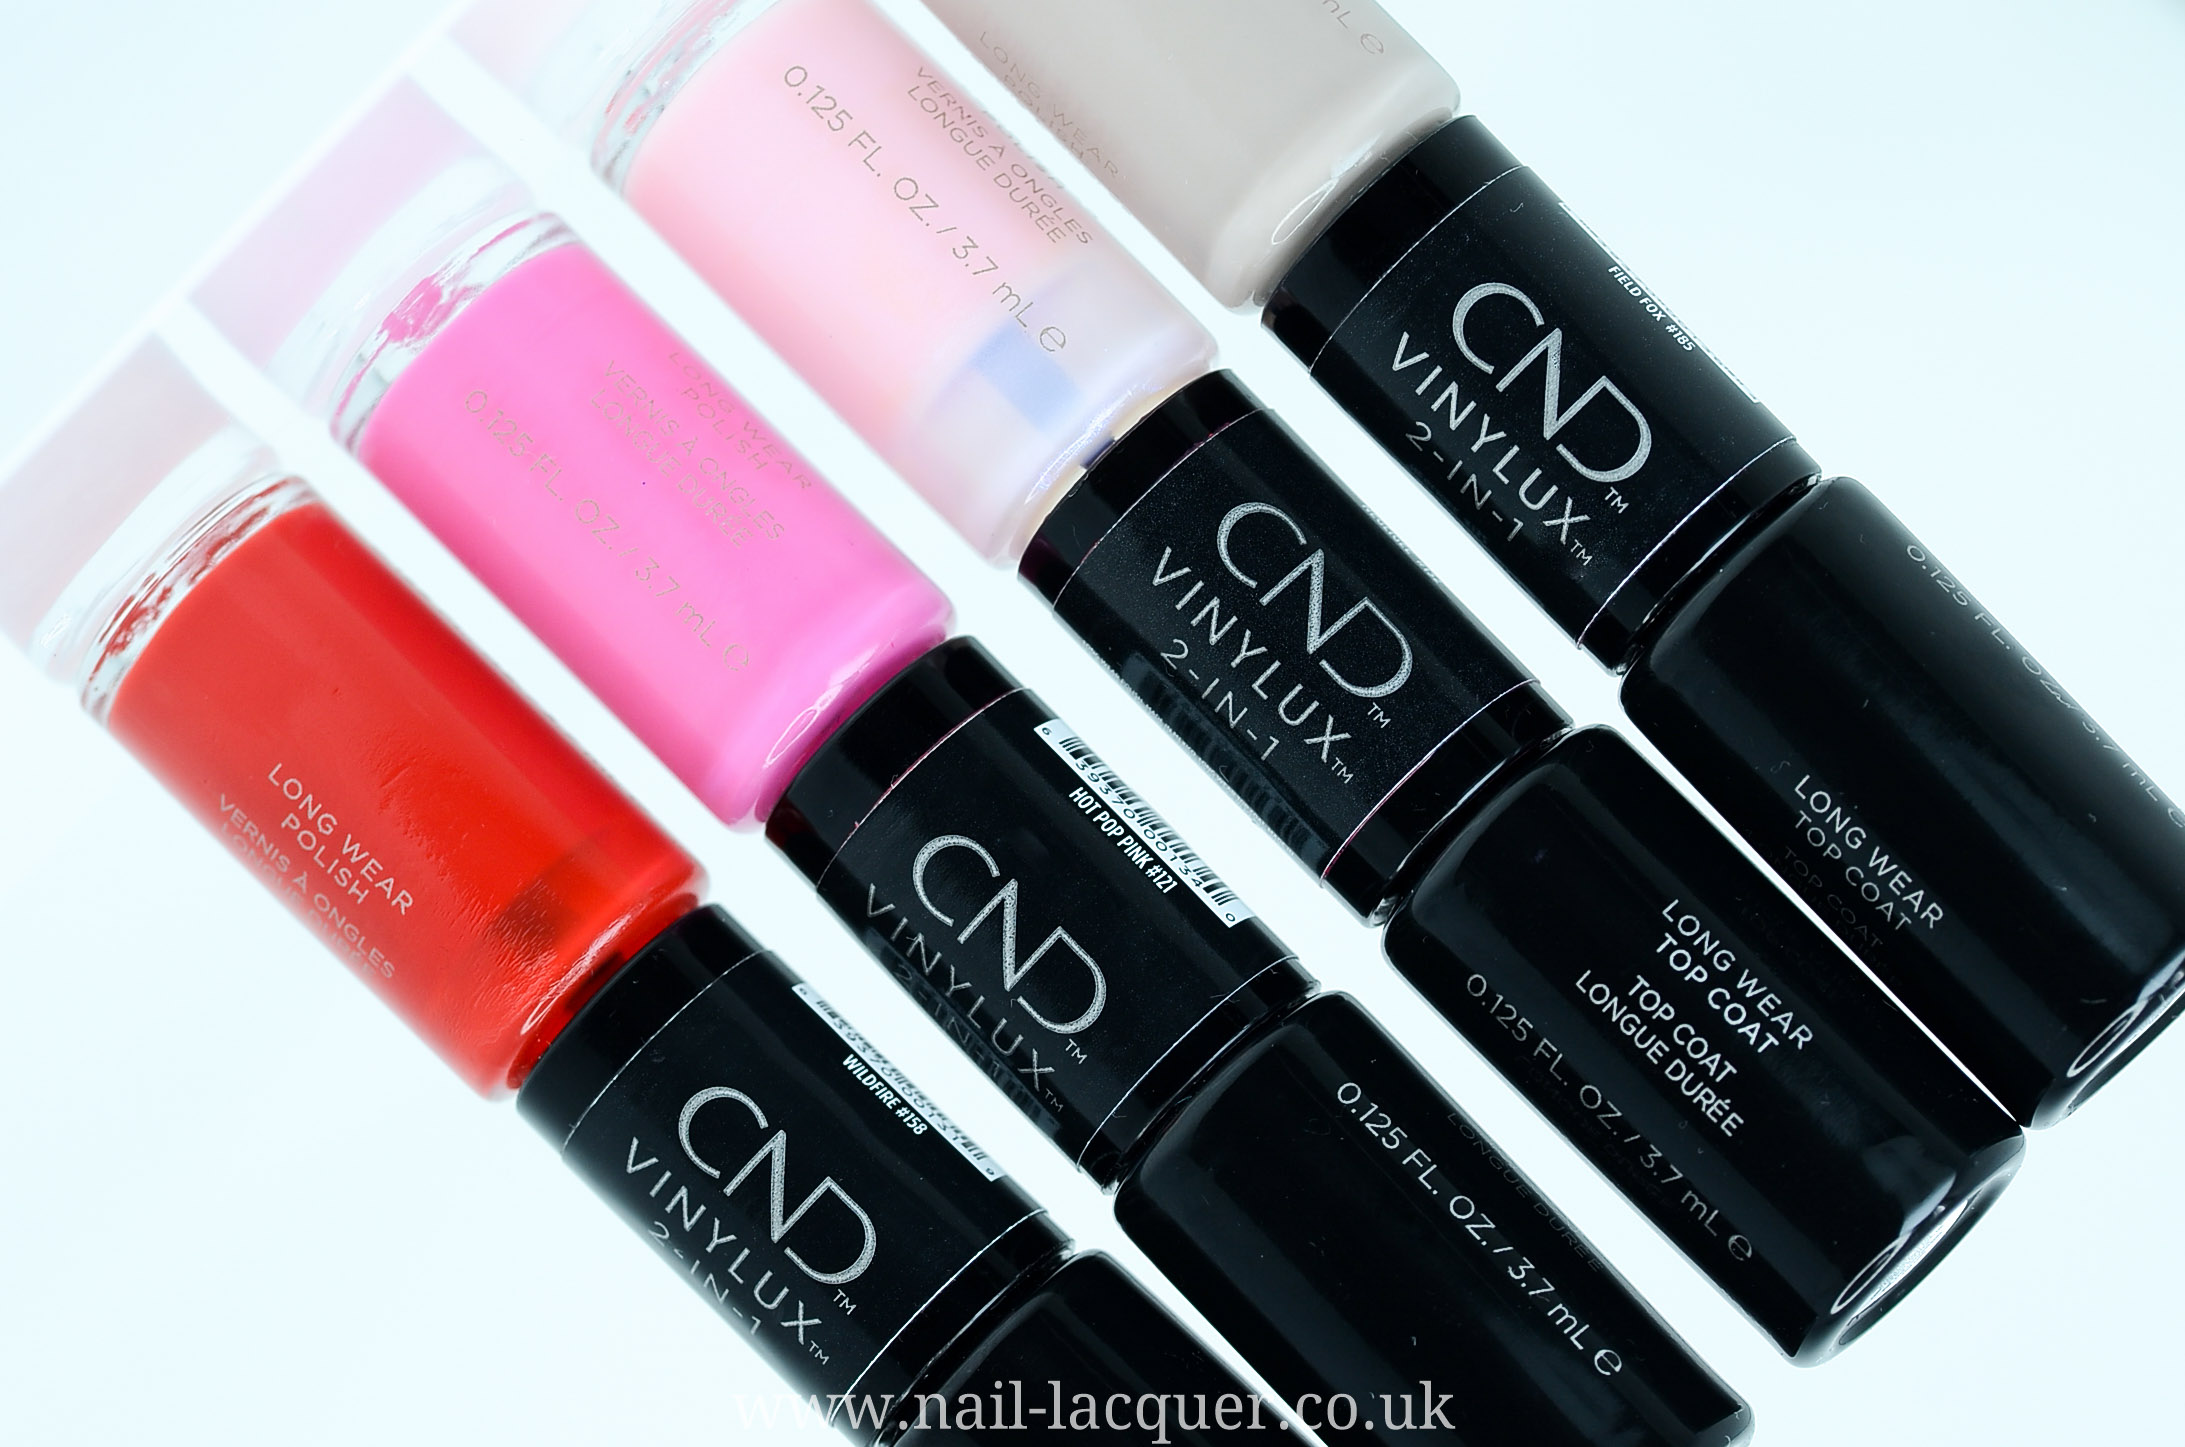 1. CND Vinylux Long Wear Nail Polish in "New Wave" - wide 4